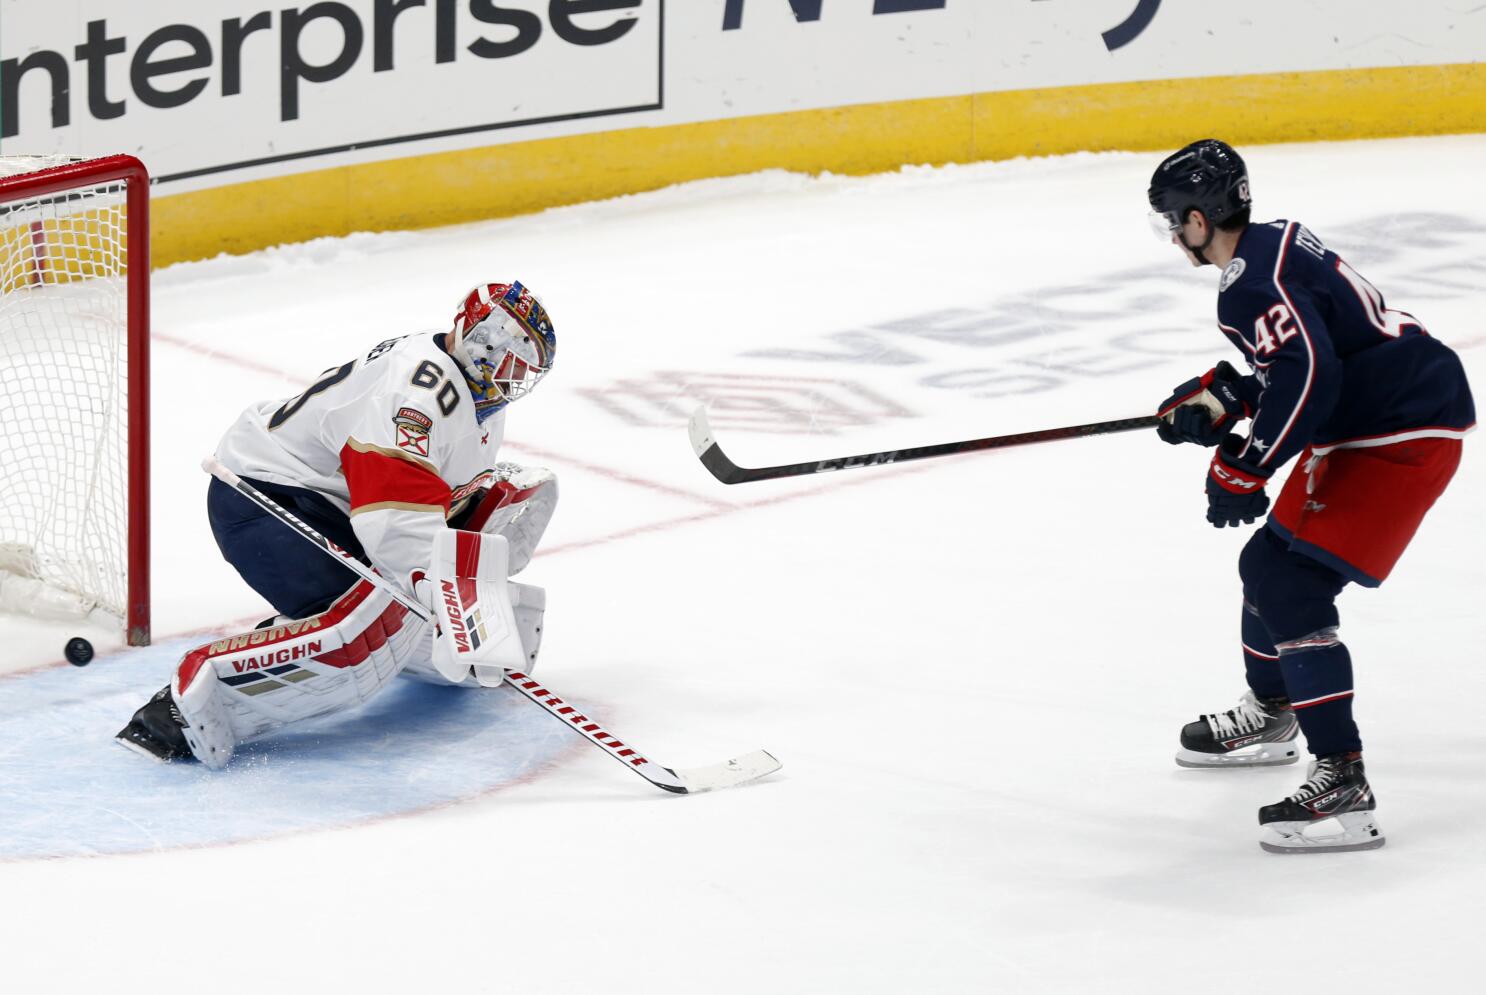 Blue Jackets on a Roll Behind Tortorella and Bobrovsky - The New York Times